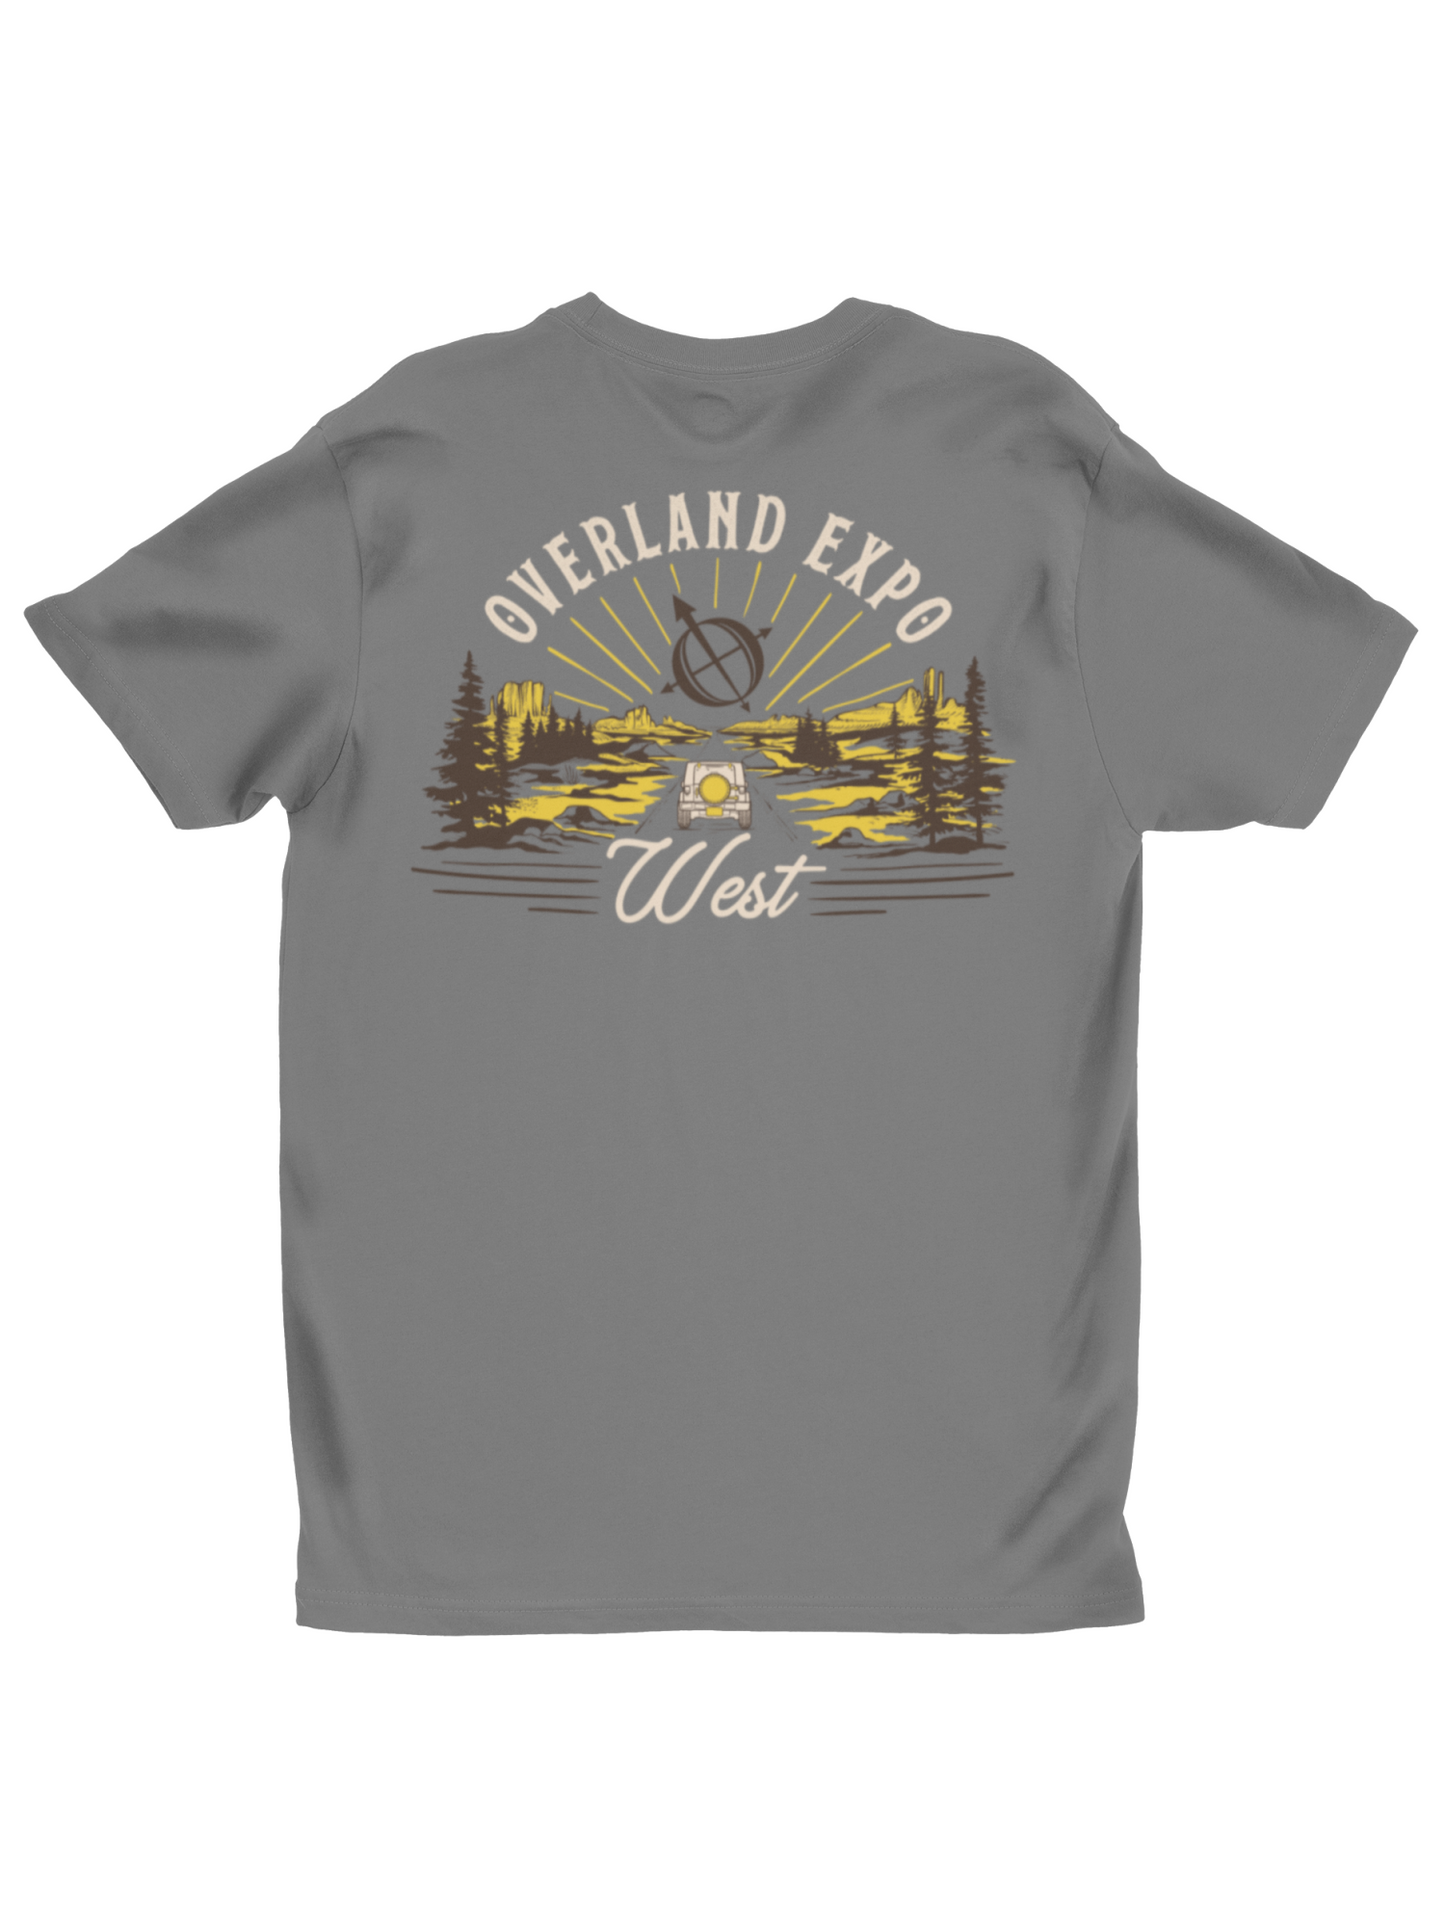 OE West 2022 - Limited Tee - Charcoal